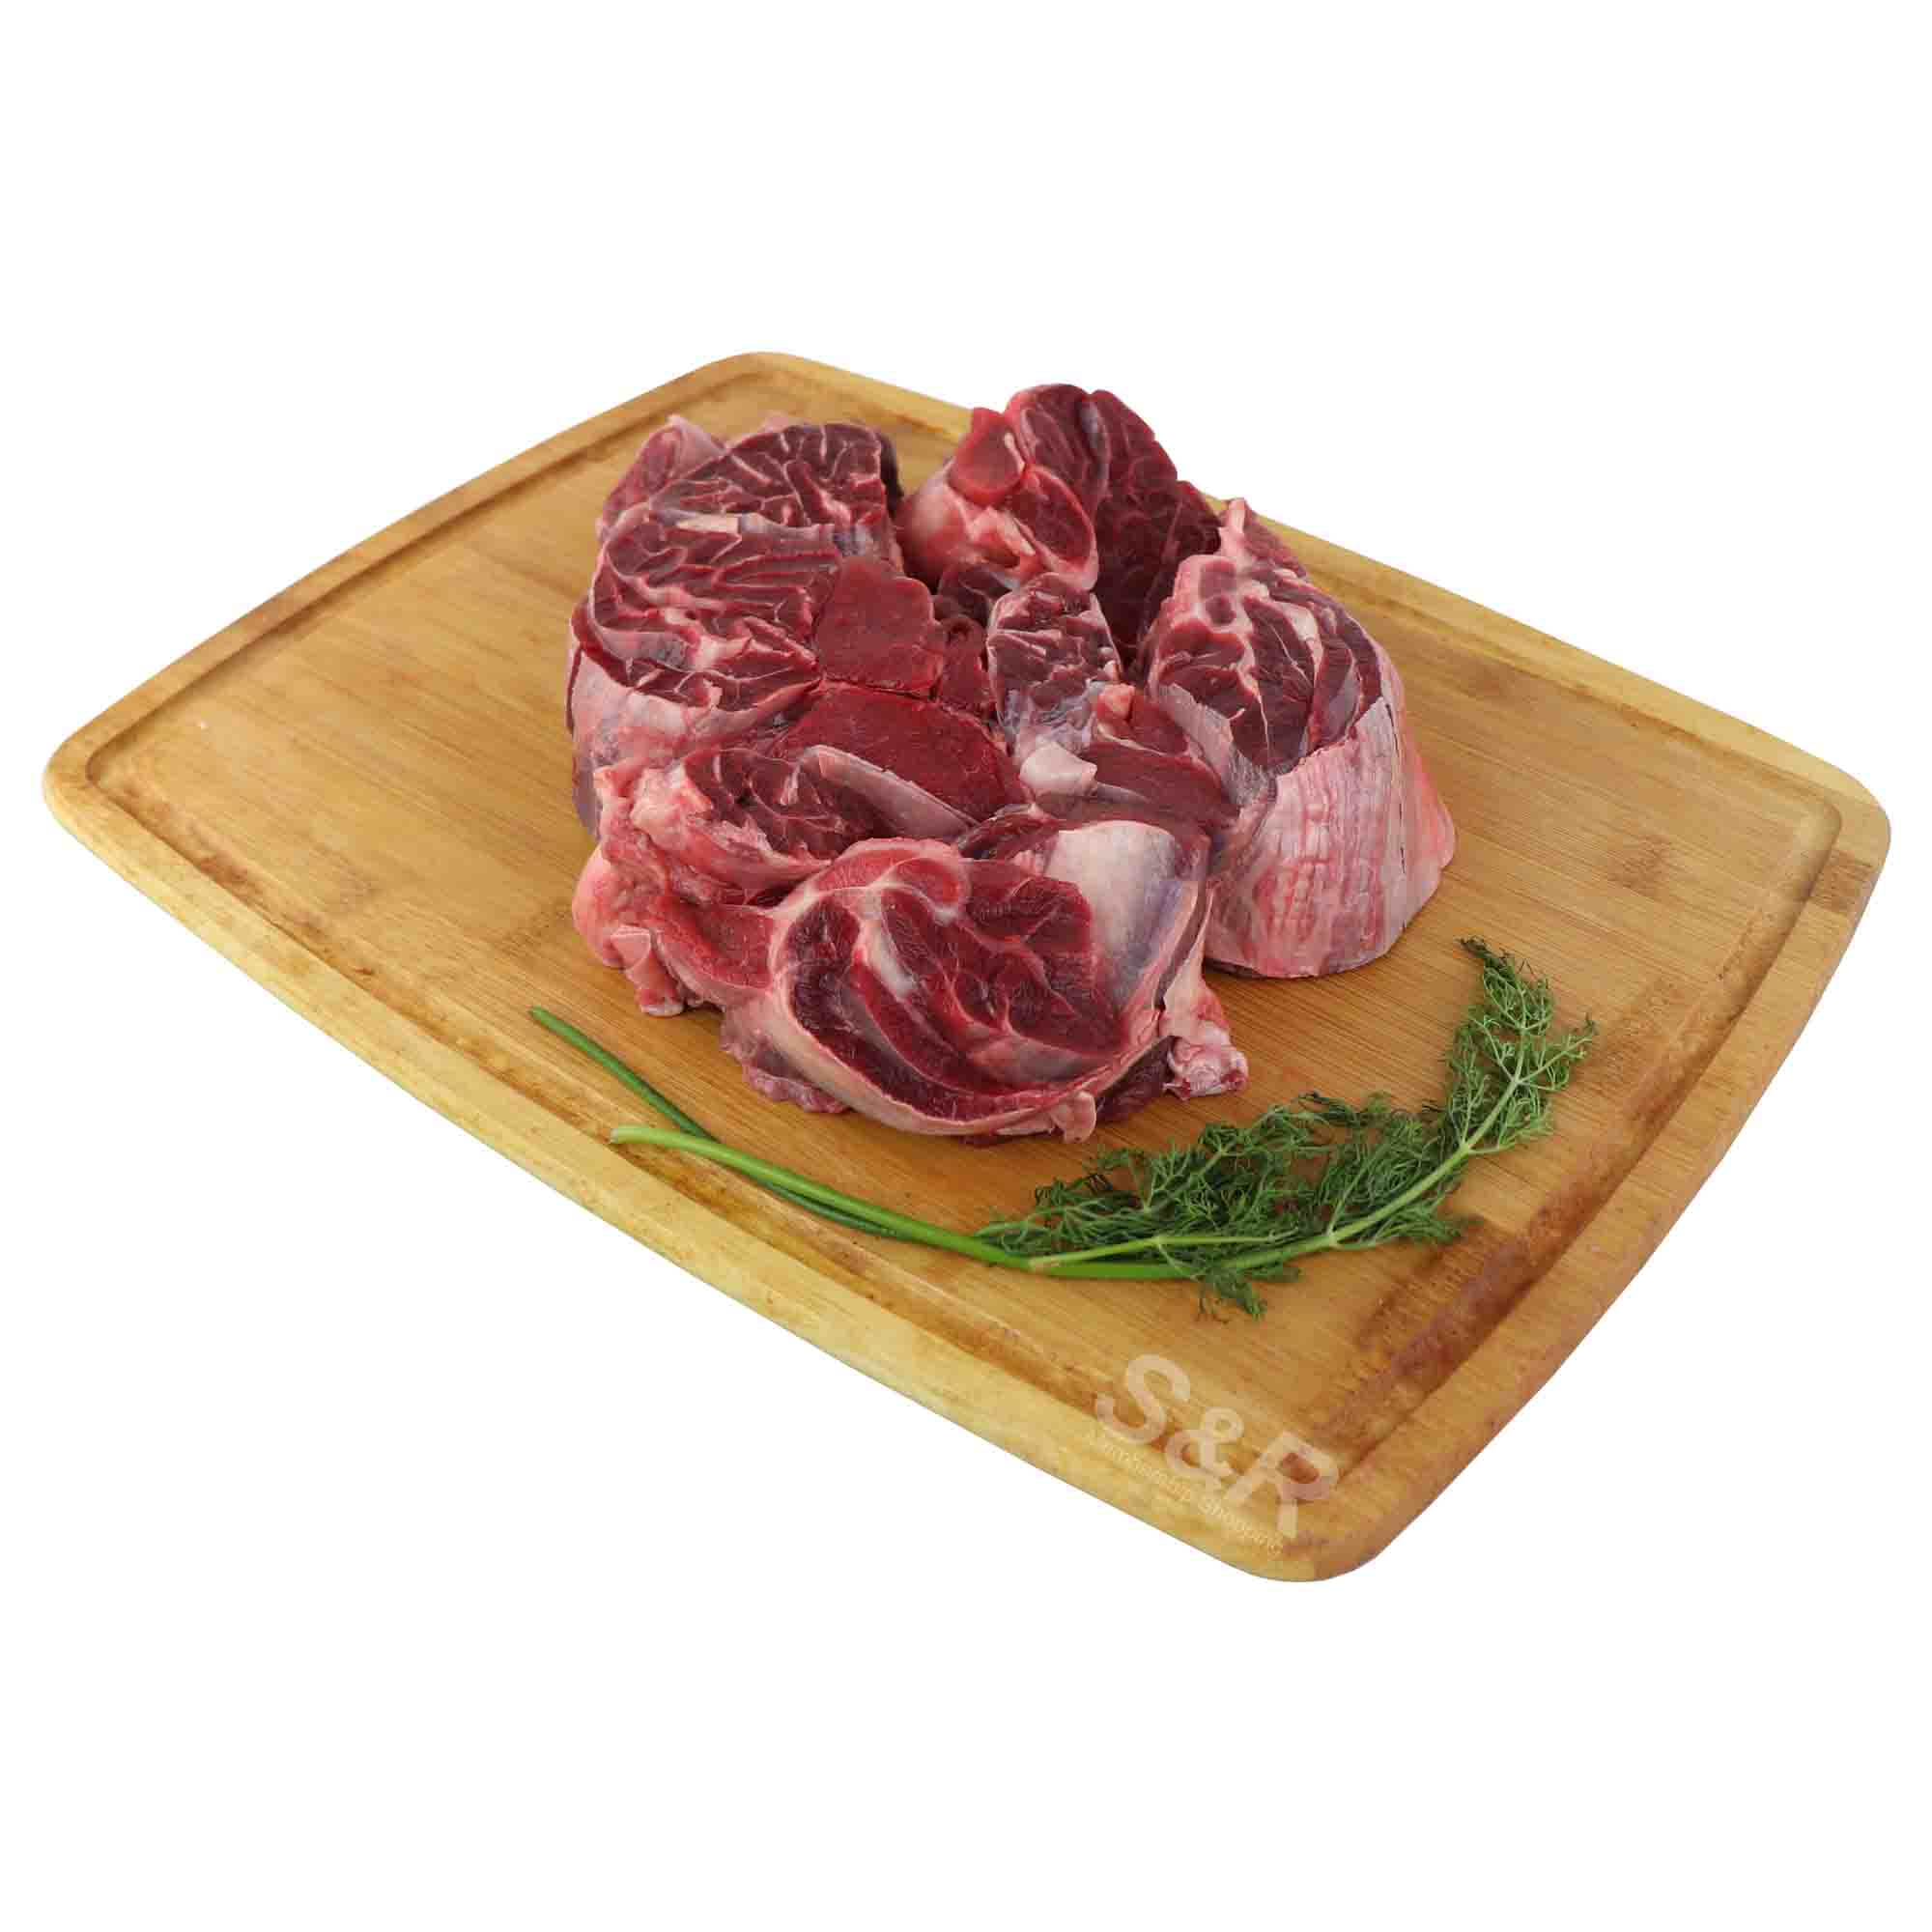 S&R Beef Shin approx. 2kg